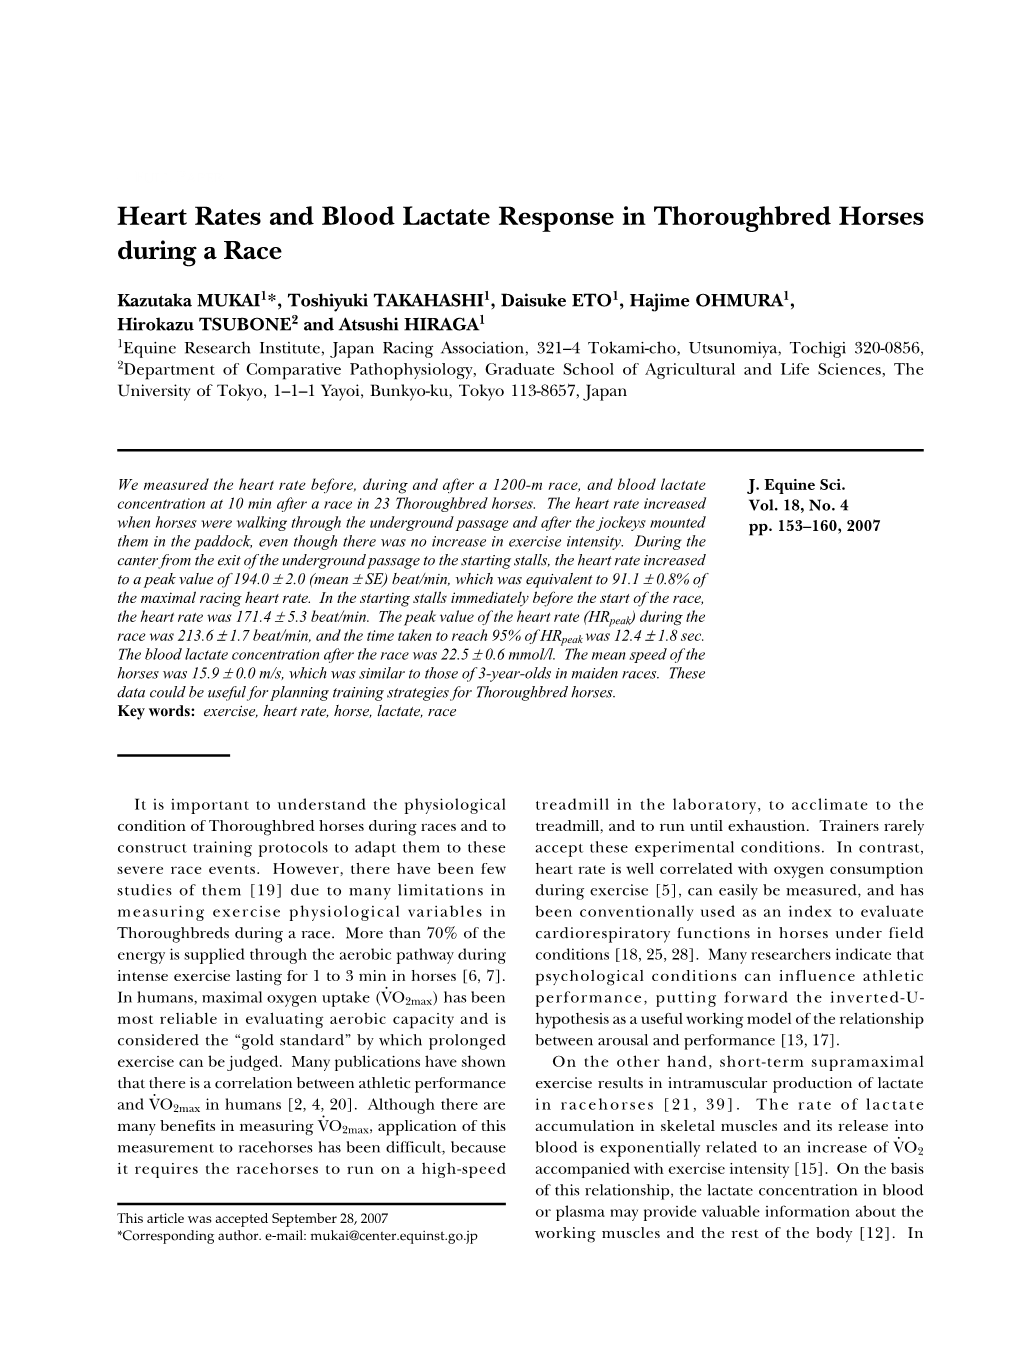 Heart Rates and Blood Lactate Response in Thoroughbred Horses During a Race